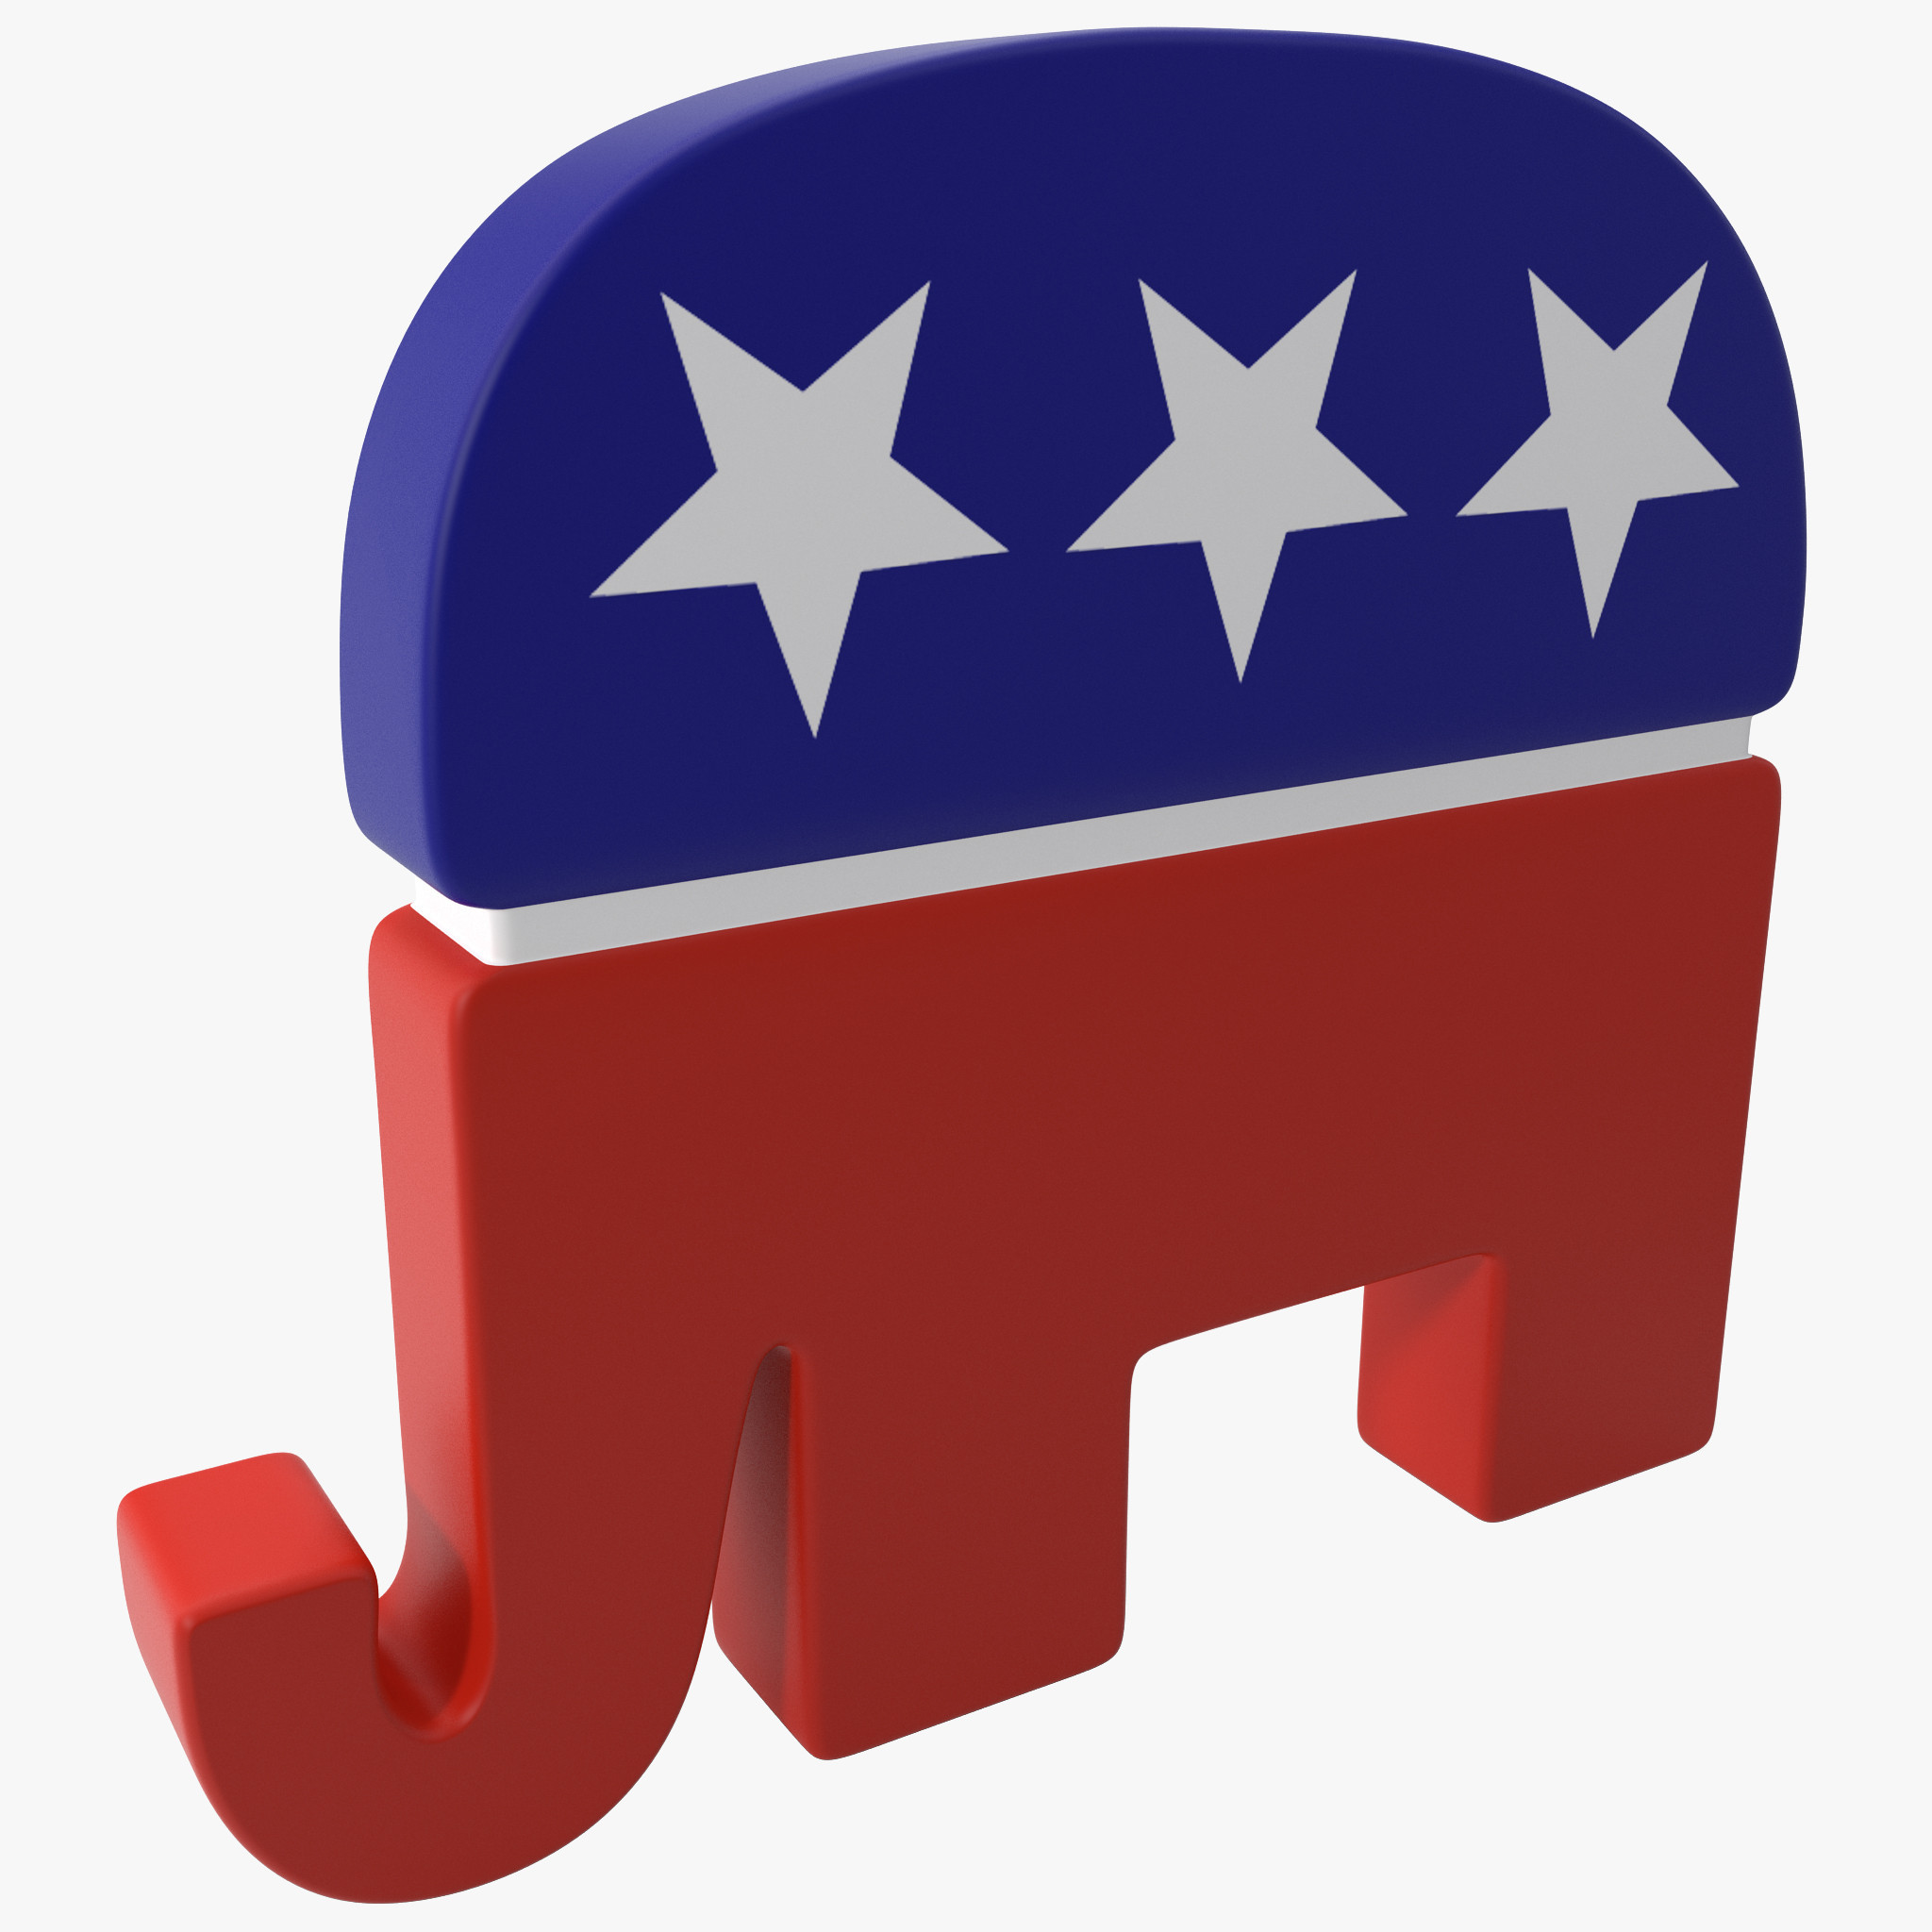 2048x2048 Wallpapers. Download Free Pictures, Images and Photos Republican Party .